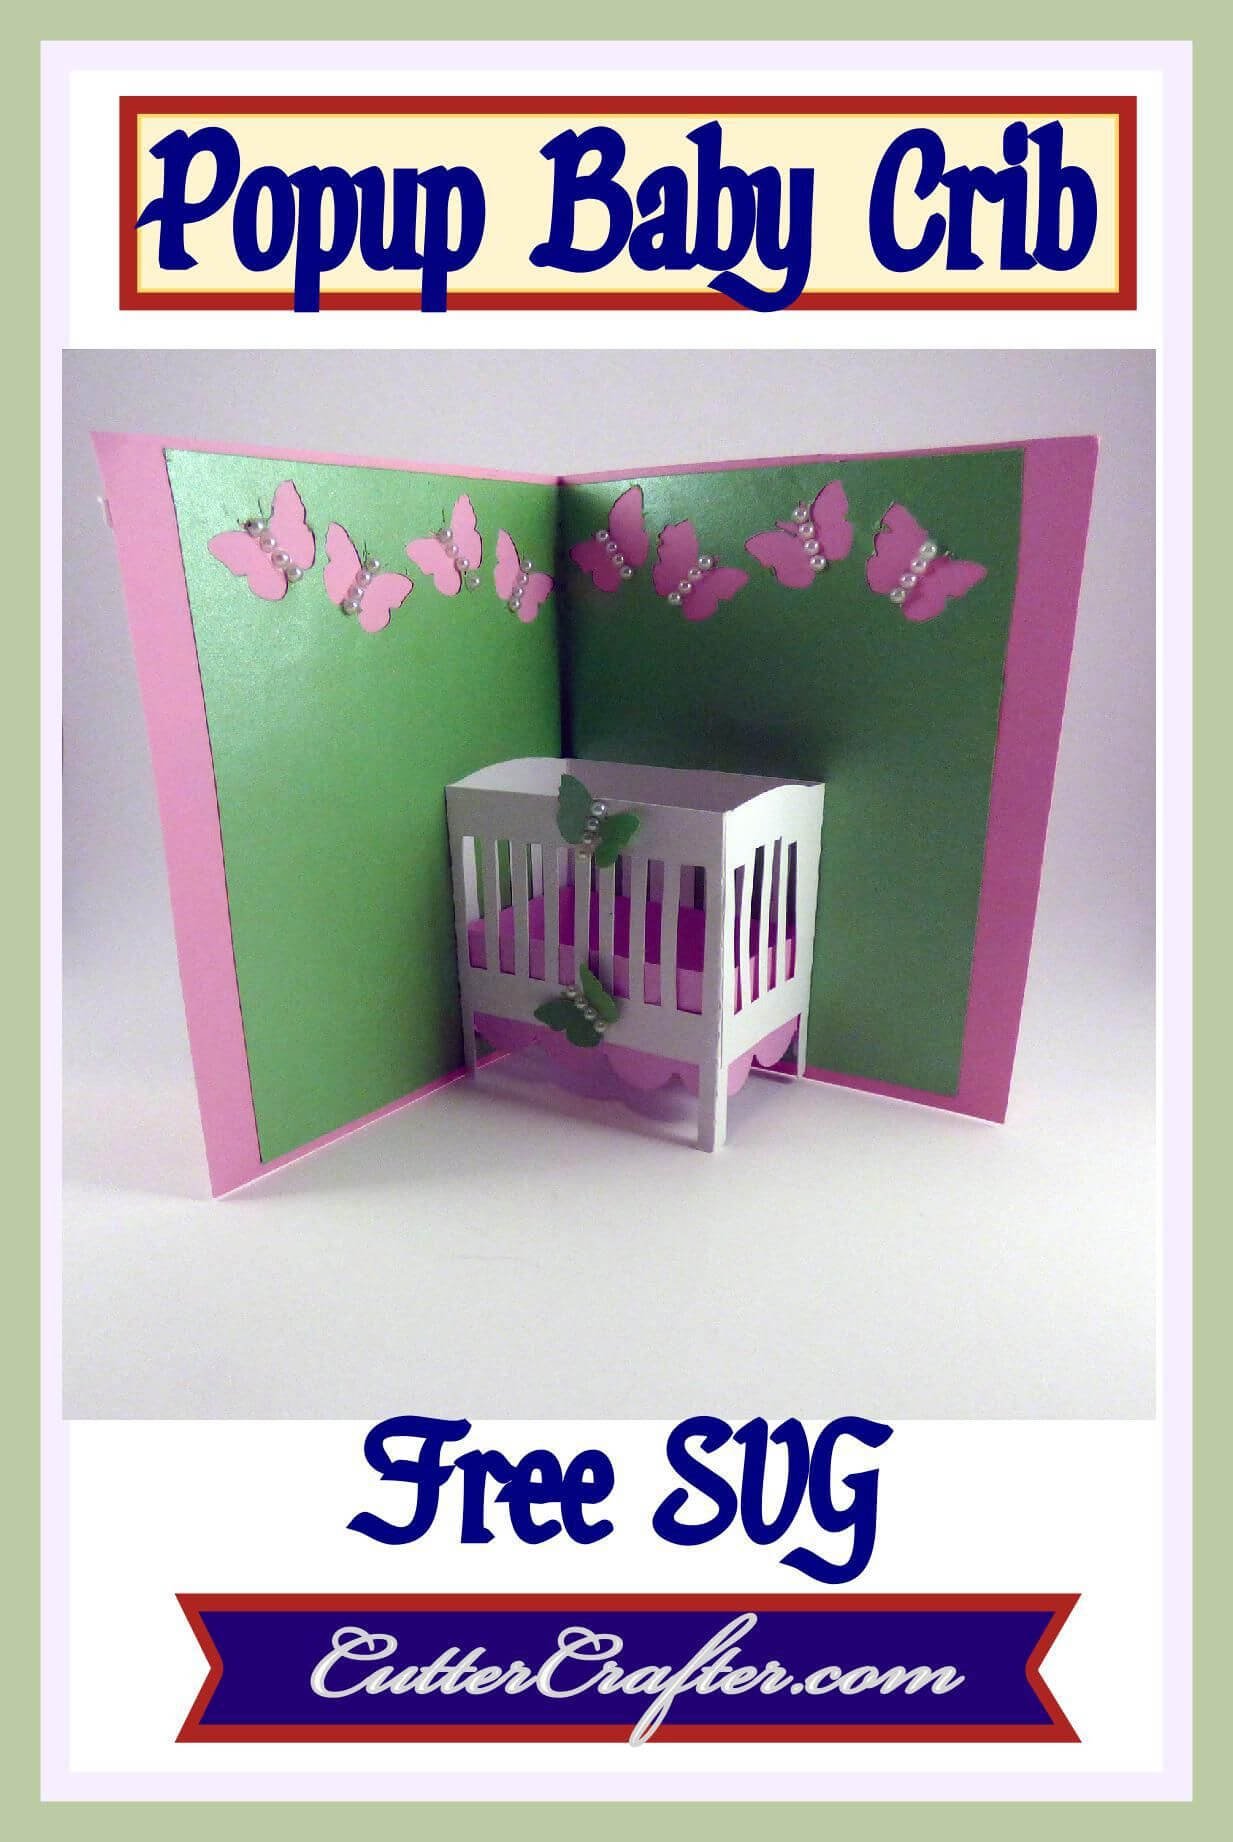 Baby Crib Popup Card Free Svg File Available At In Popup Card Template Free